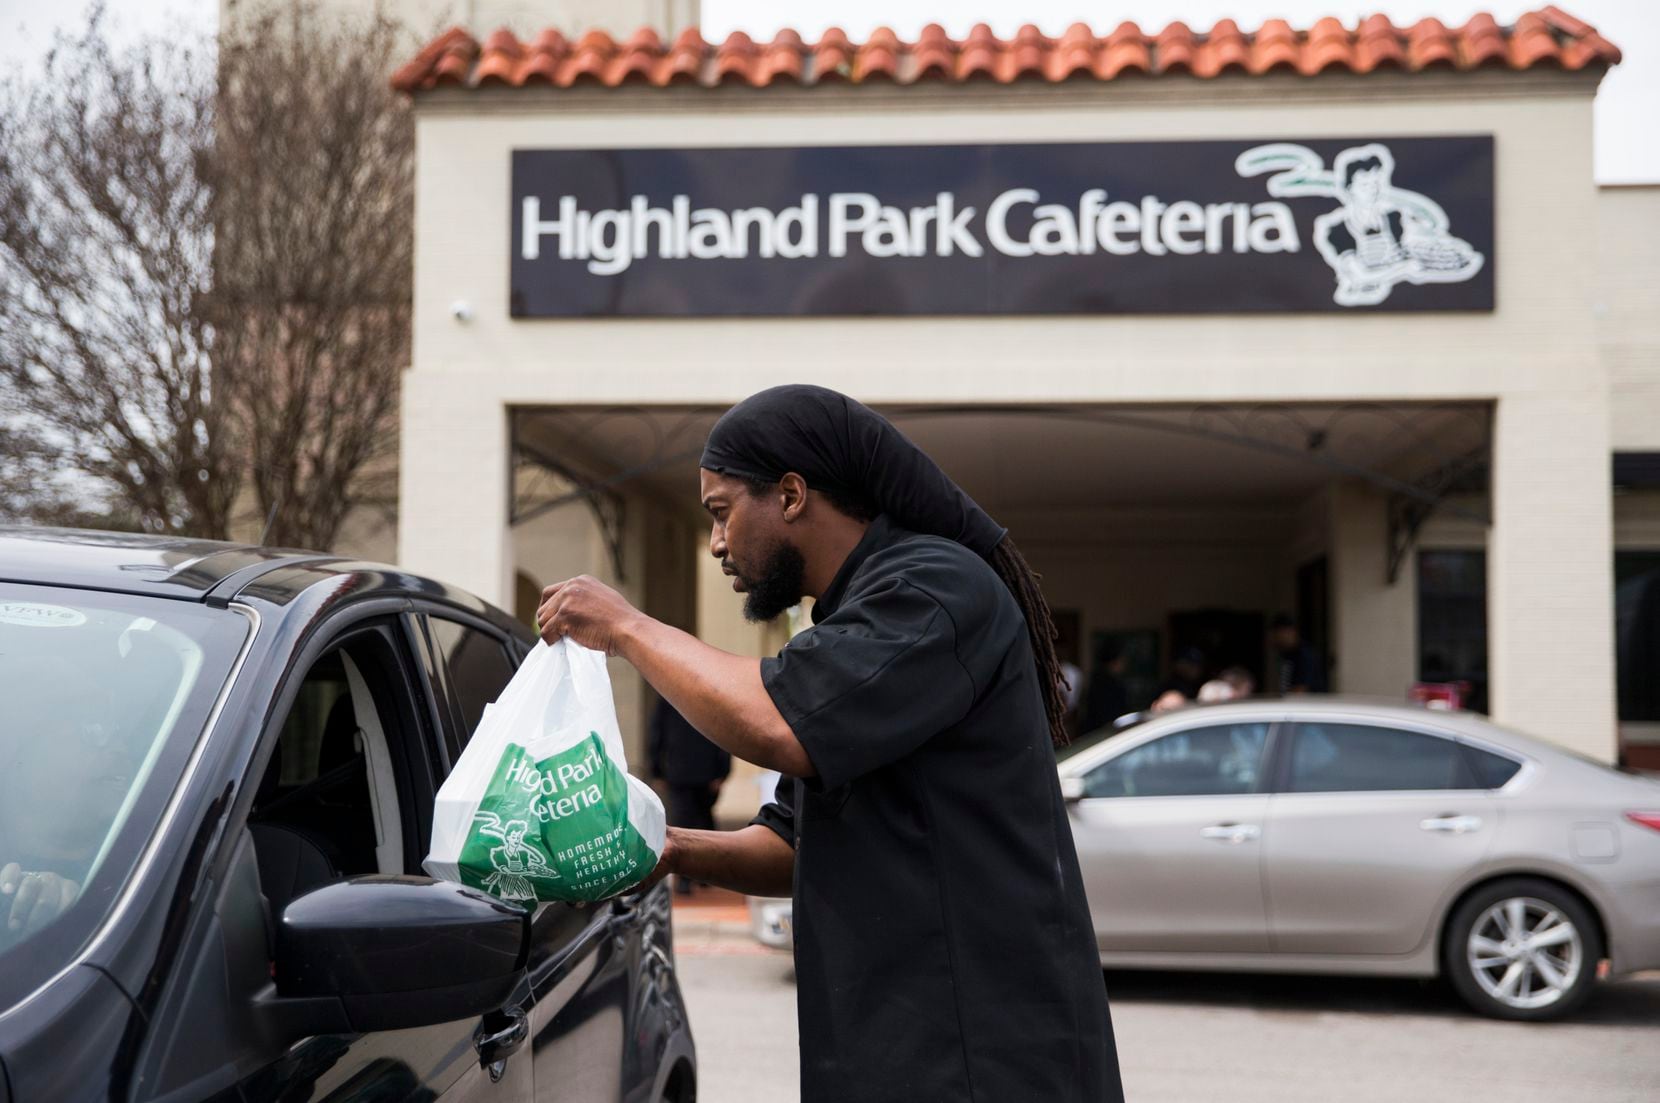 Executive Chef Johnny Howard delivers a meal to a driver outside Highland Park Cafeteria on Wednesday, March 18, 2020 in Dallas. Employees handed out free meals outside the restaurant after Dallas restaurants and bars were closed due to the spread of COVID-19. 